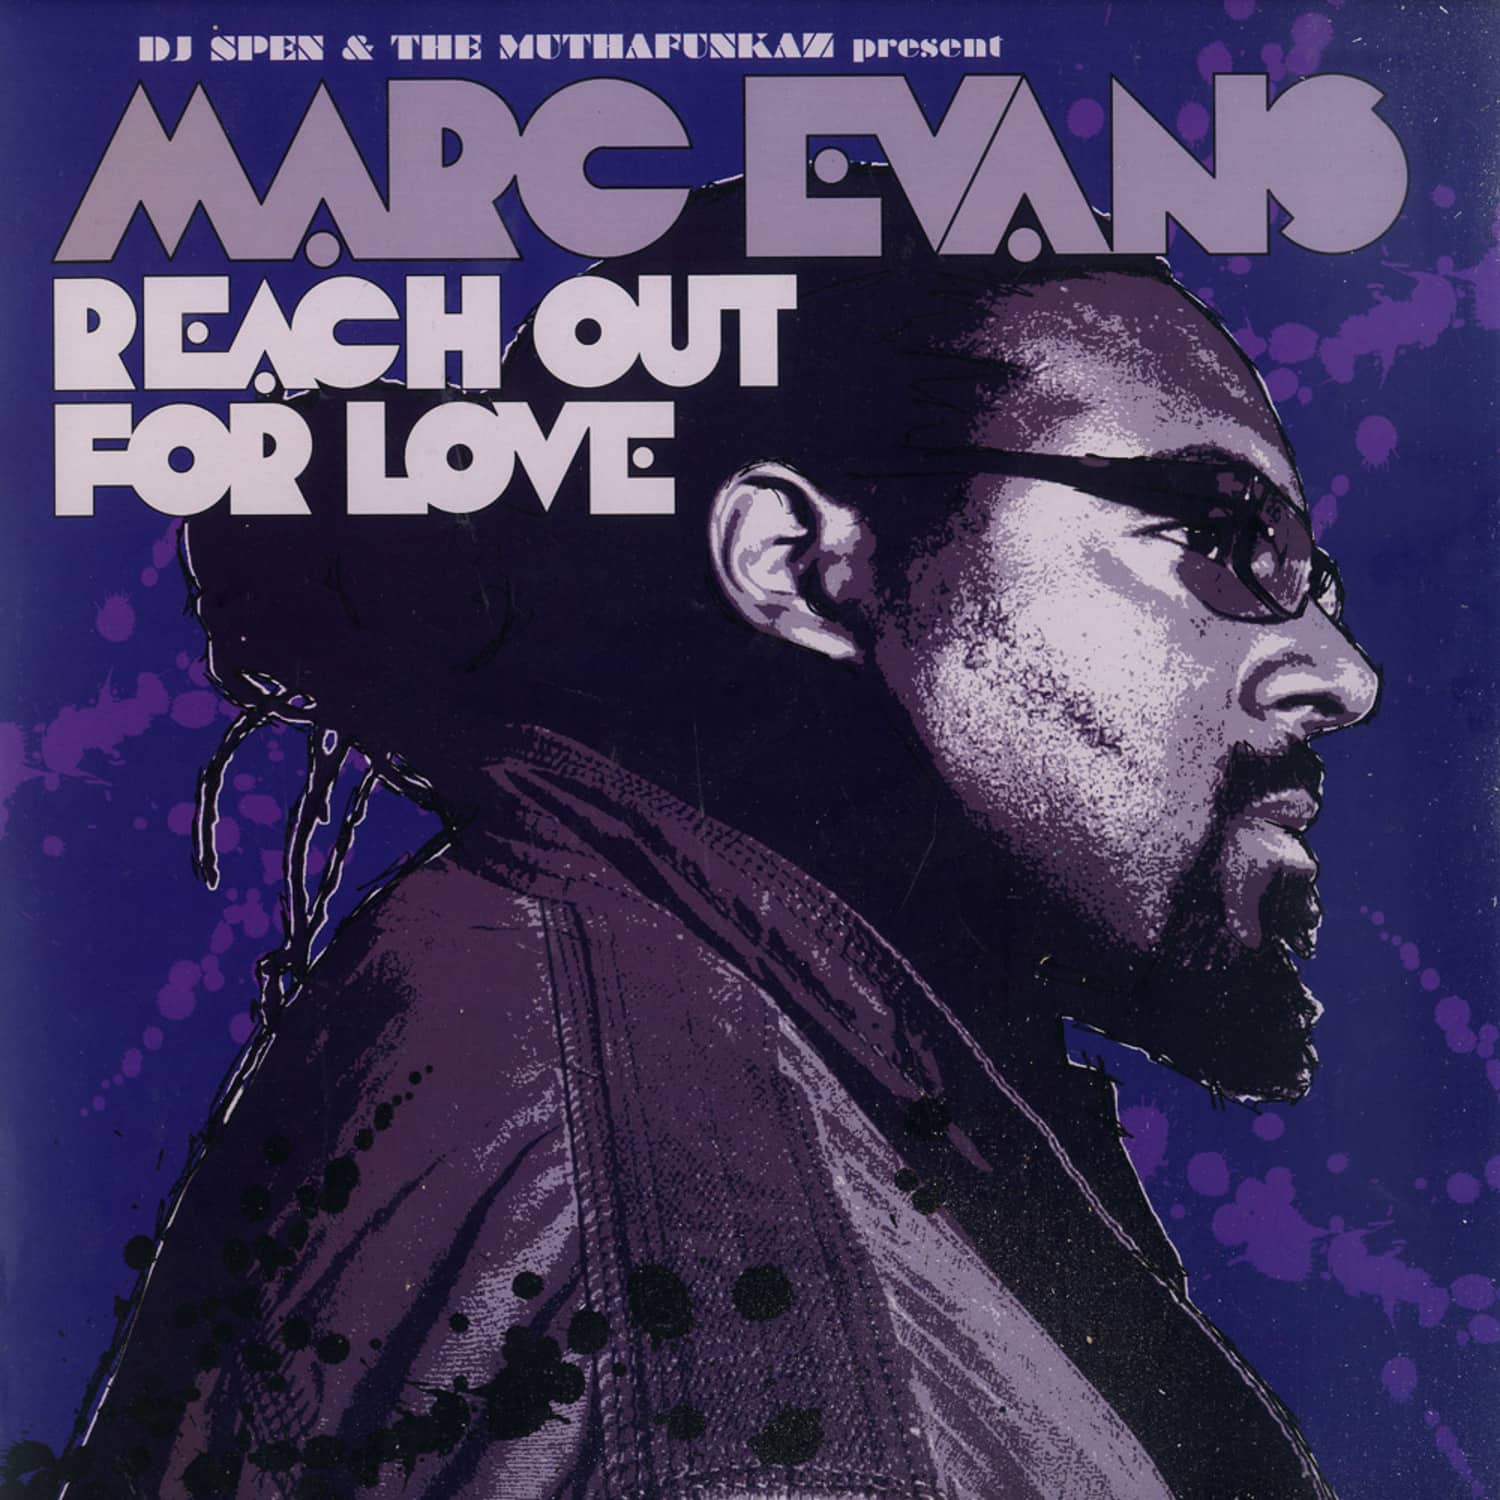 DJ Spen & The Muthafunkaz present Marc Evans - REACH OUT FOR LOVE